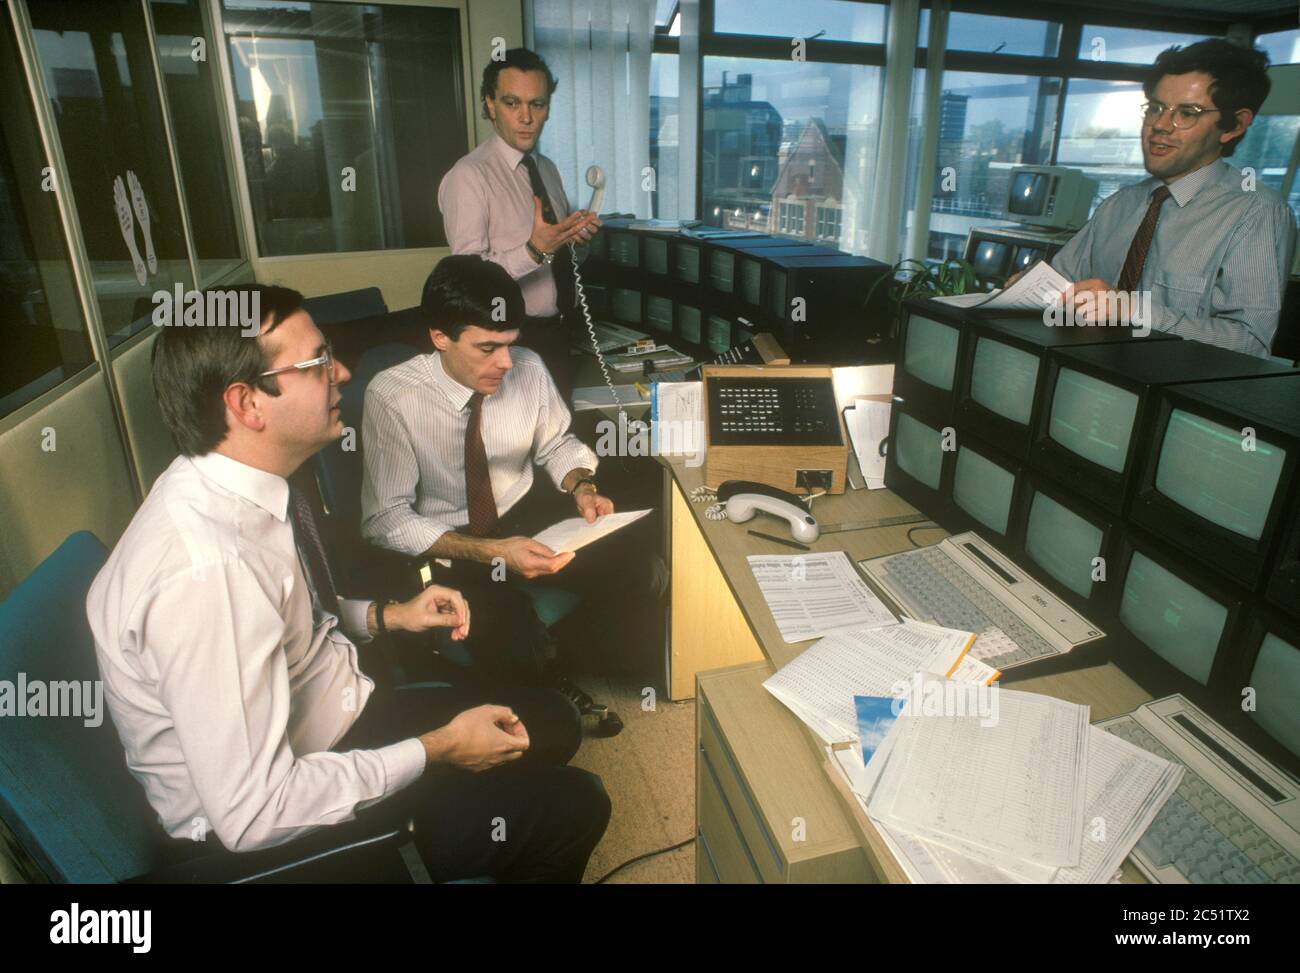 Stockbrokers 1990s UK working for Hoare Govett at their  terminals City of London office. Circa 1995  England UK HOMER SYKES Stock Photo